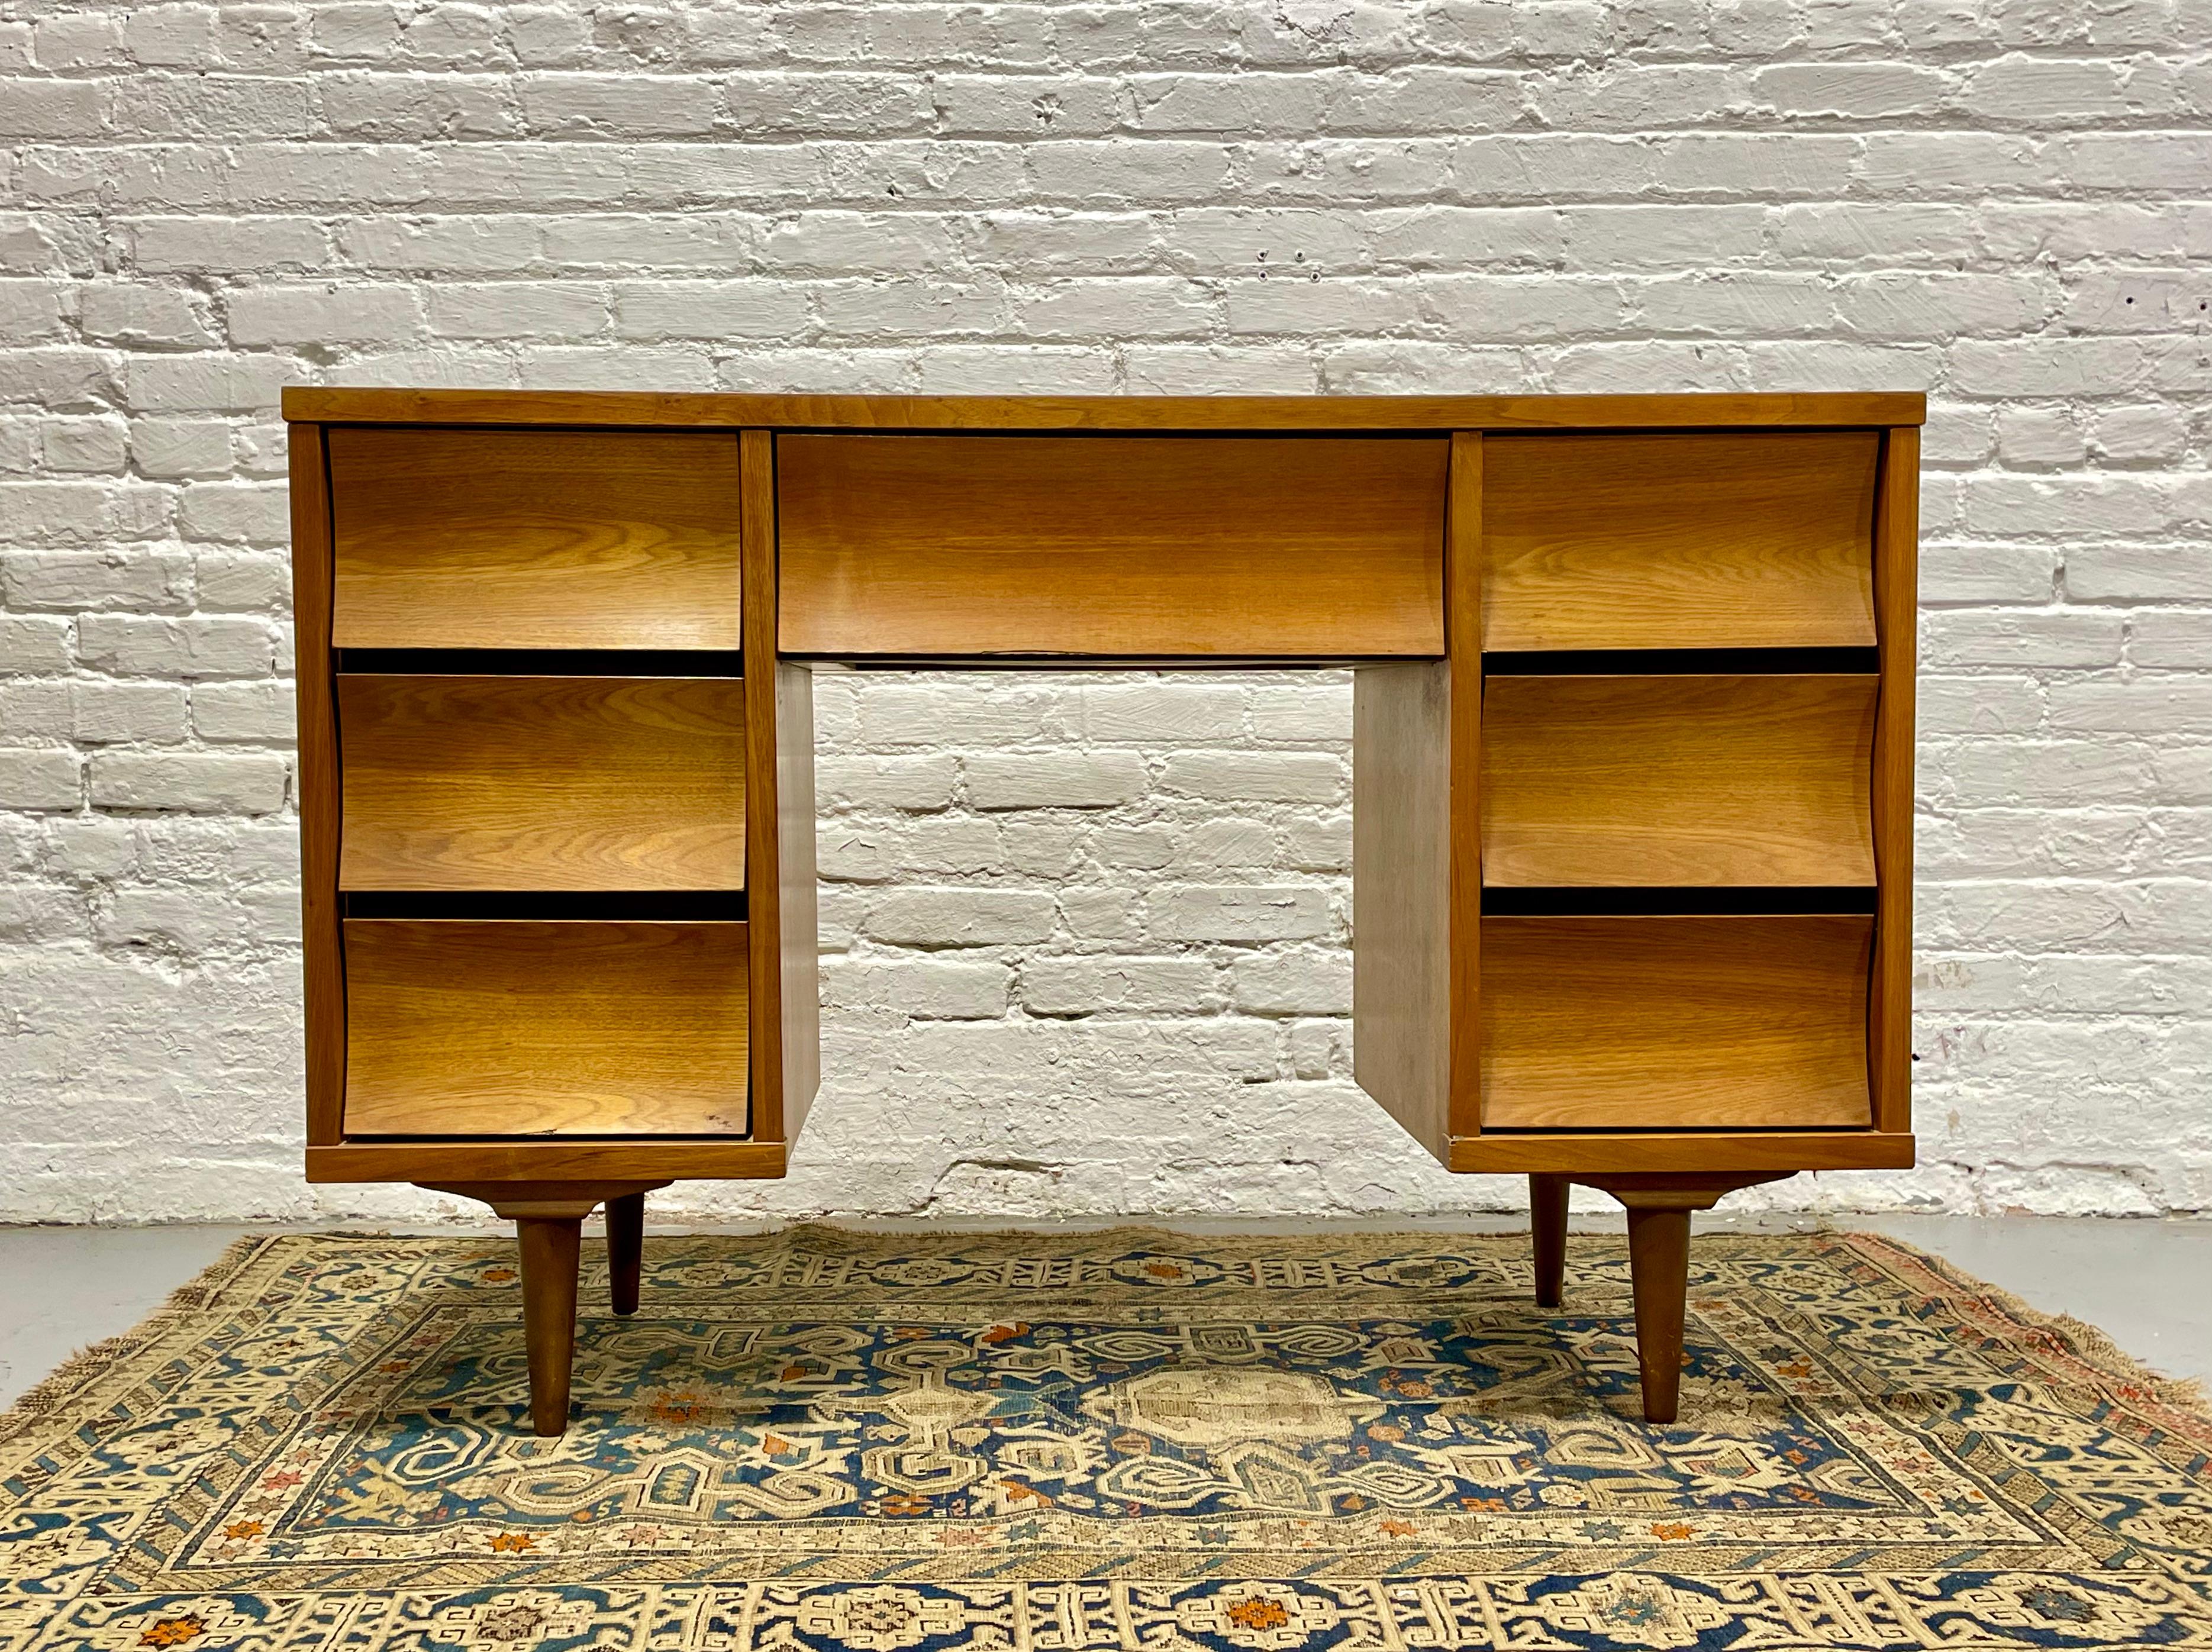 Mid Century Modern Walnut Desk by Johnson Carper, featuring concave drawers and seven deep and spacious drawers for plenty of storage space. The tabletop is a laminate (formica) woodgrain, perfect for withstanding the wear and tear of a work